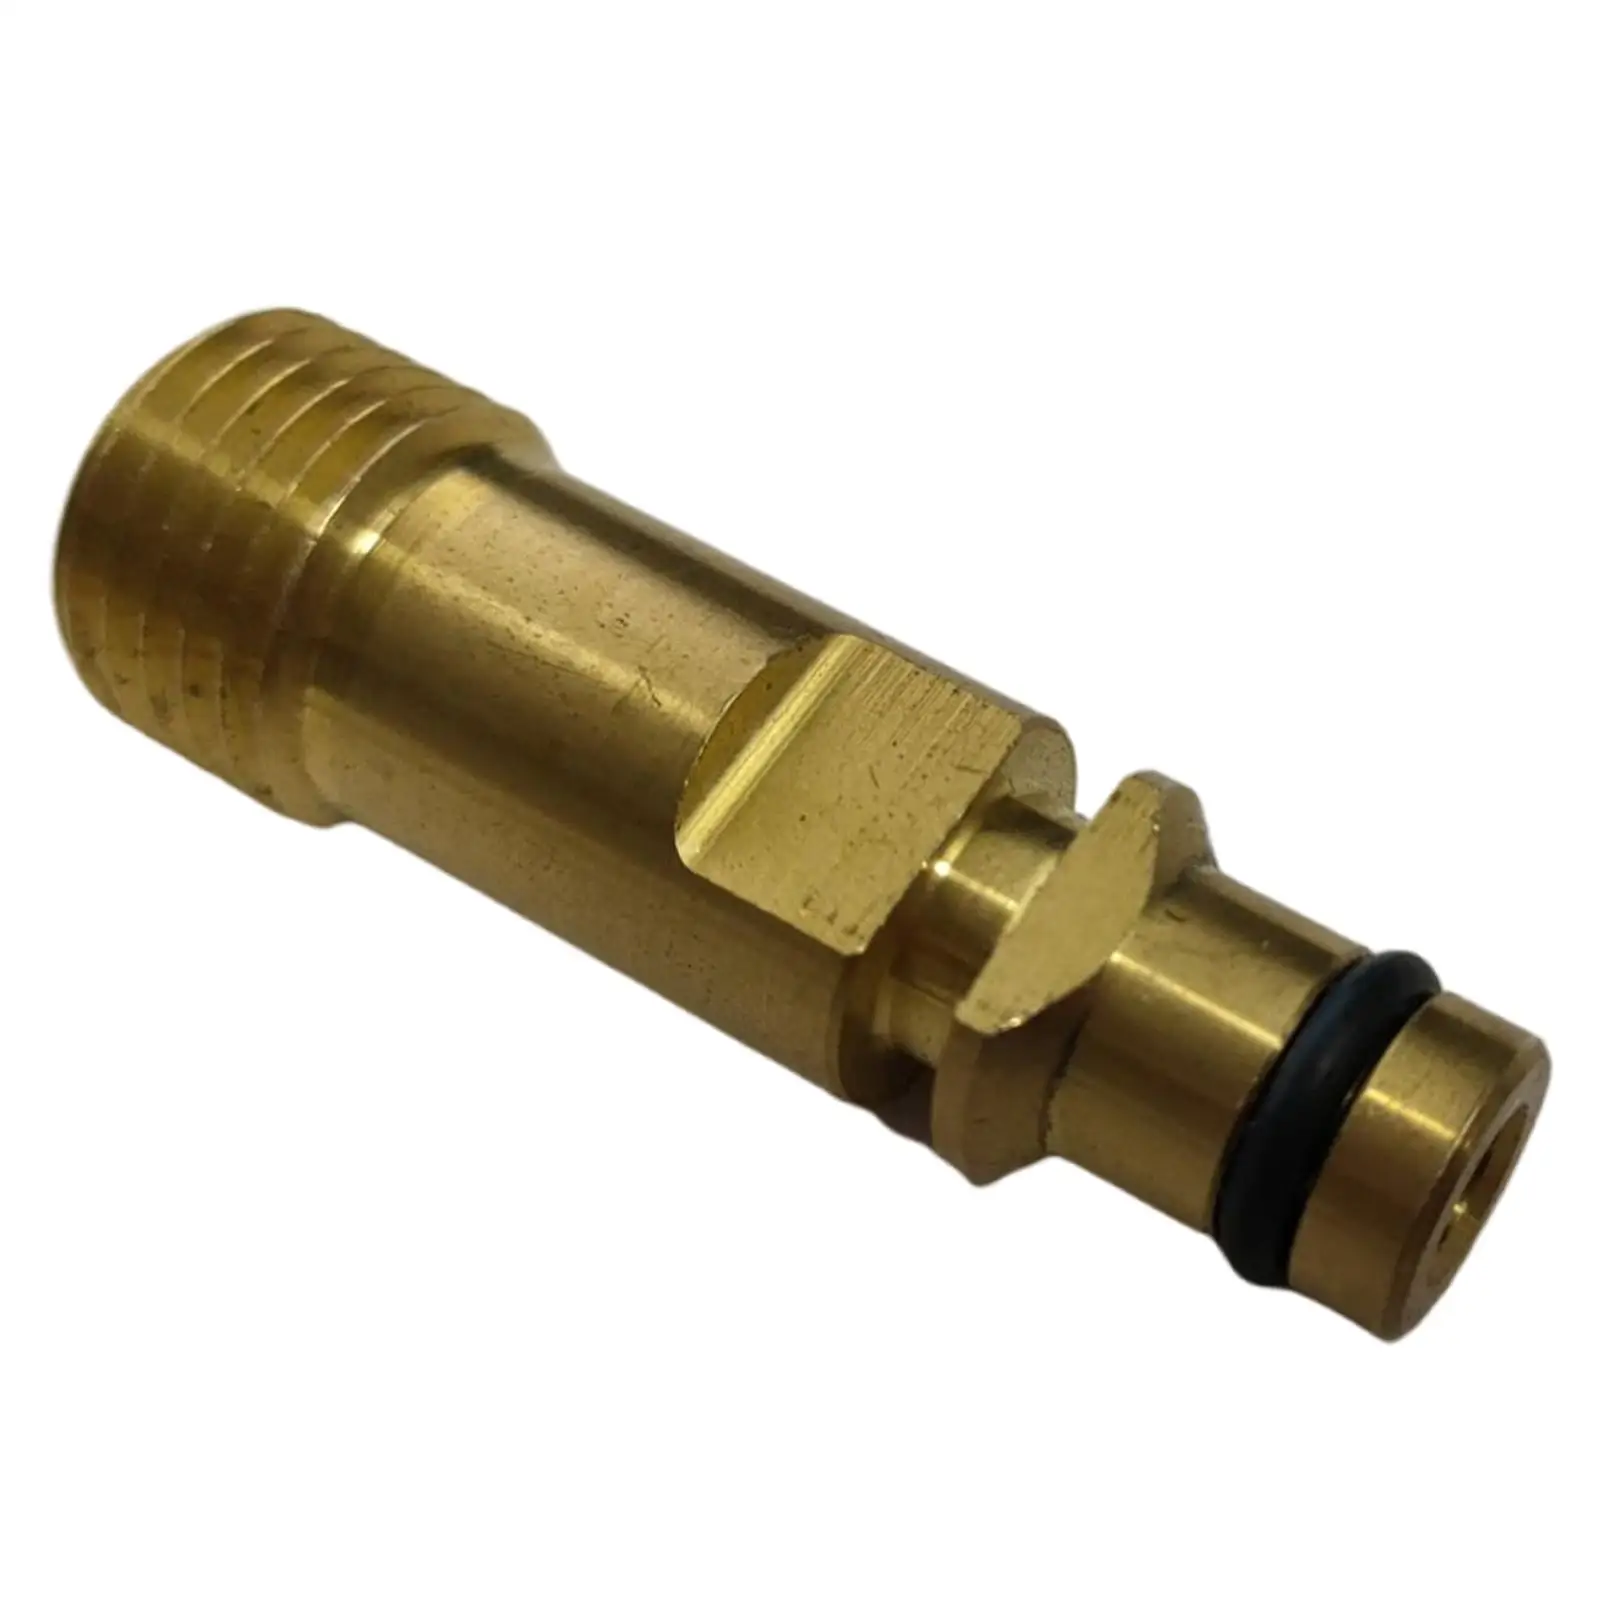 M22*1.5 Pressure Washer Quick Connector Adaptor Washing Machine Tube Joint for K5